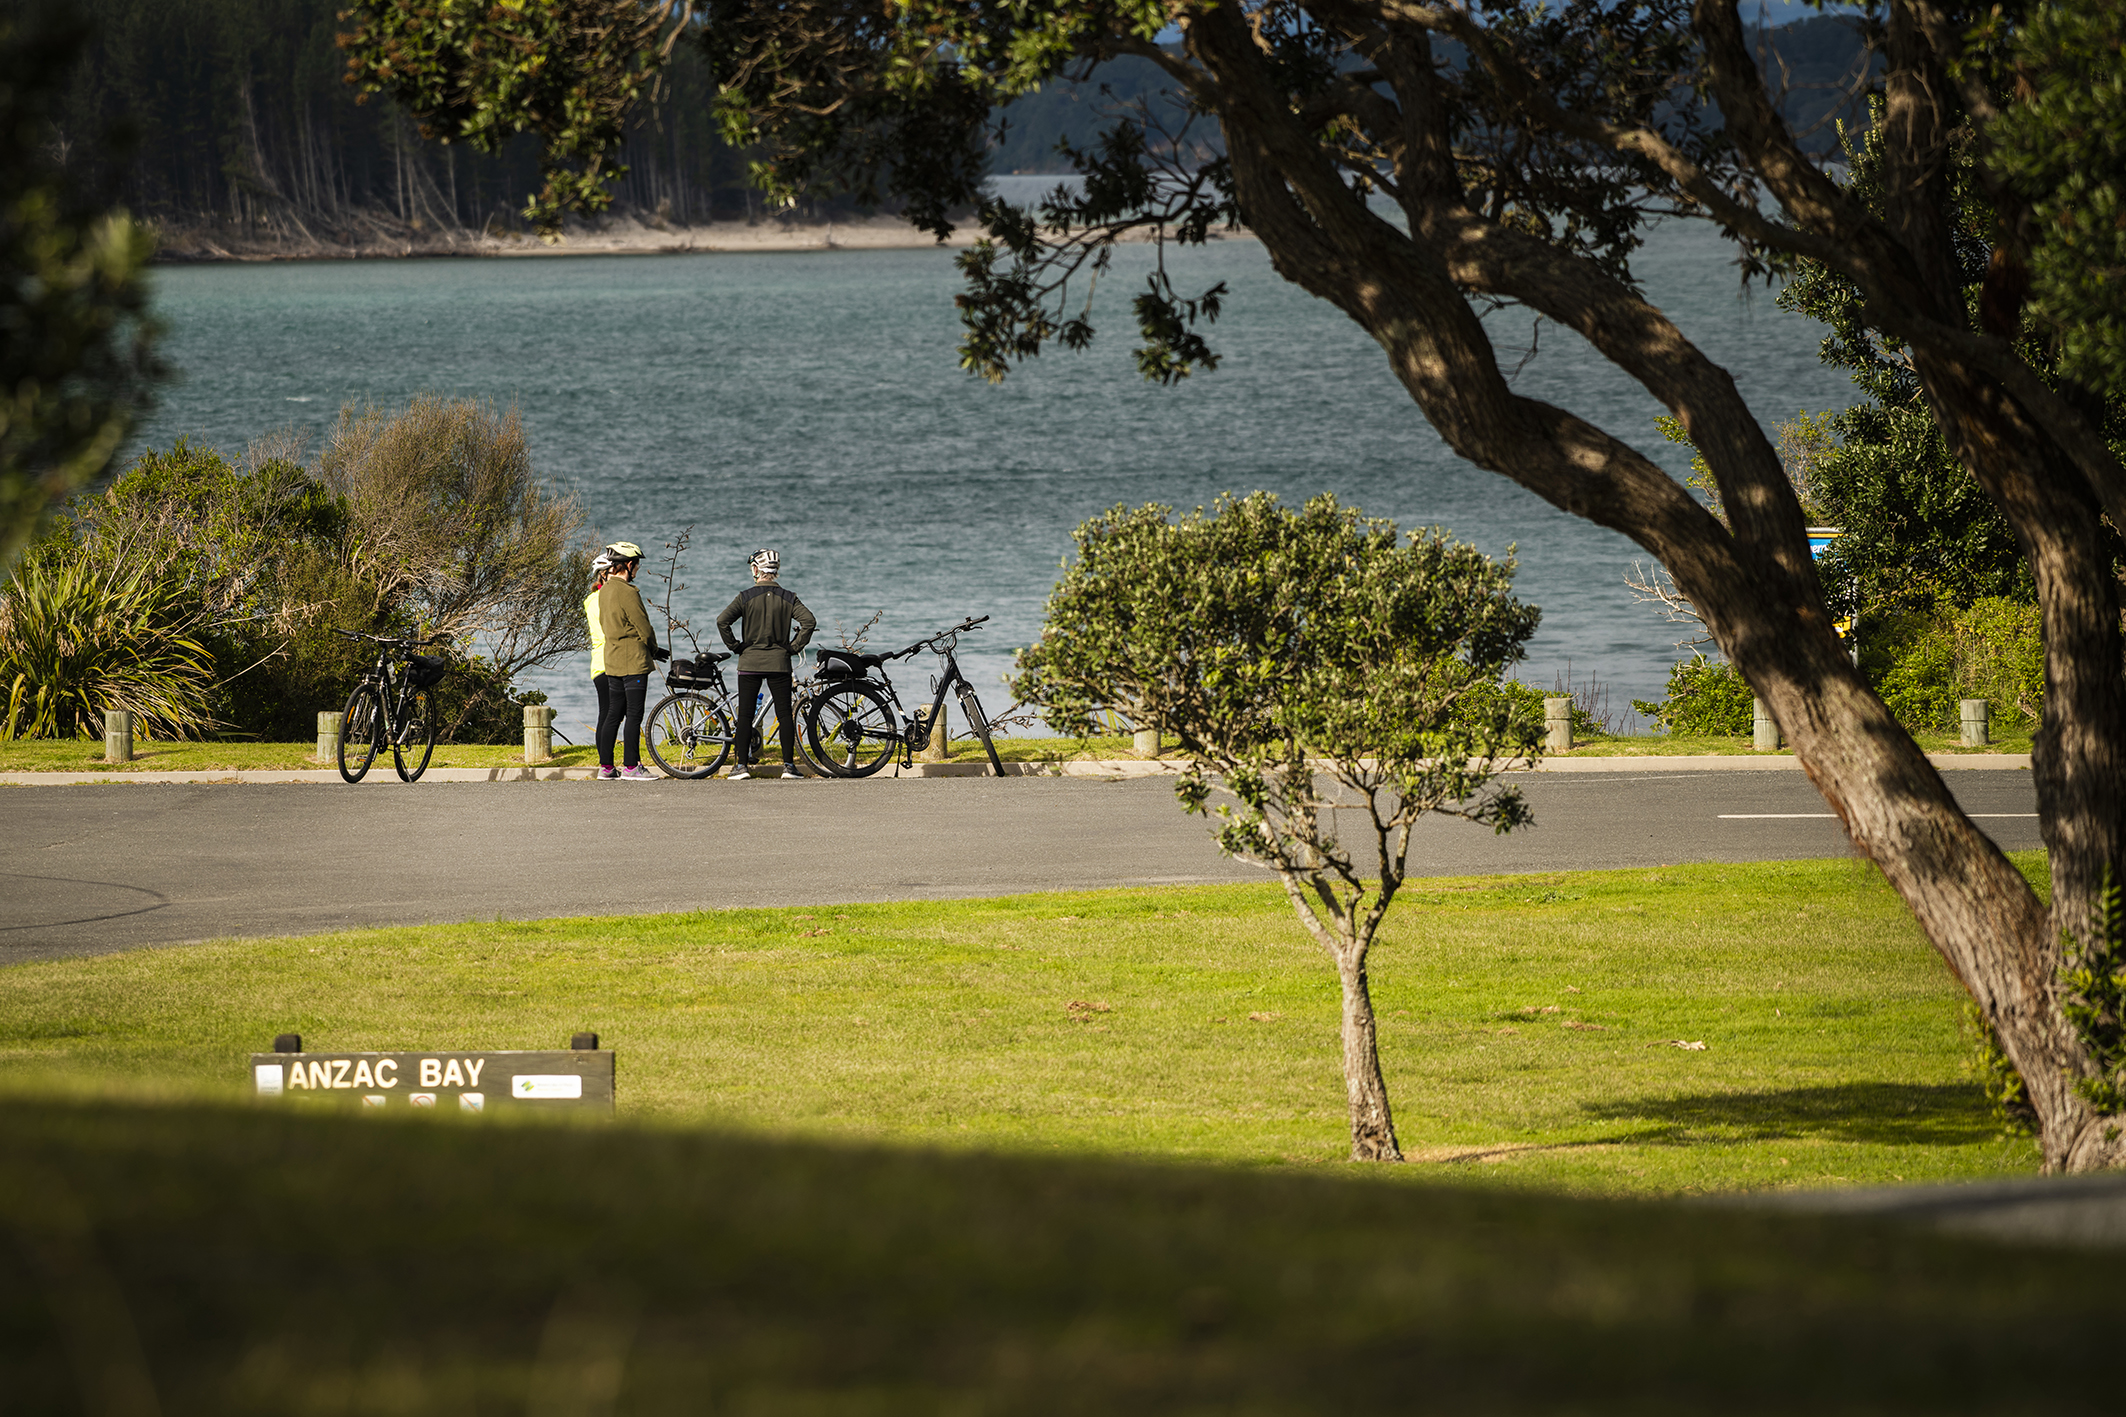 One of the cycle path starting points, Anzac Bay, Bowentown.